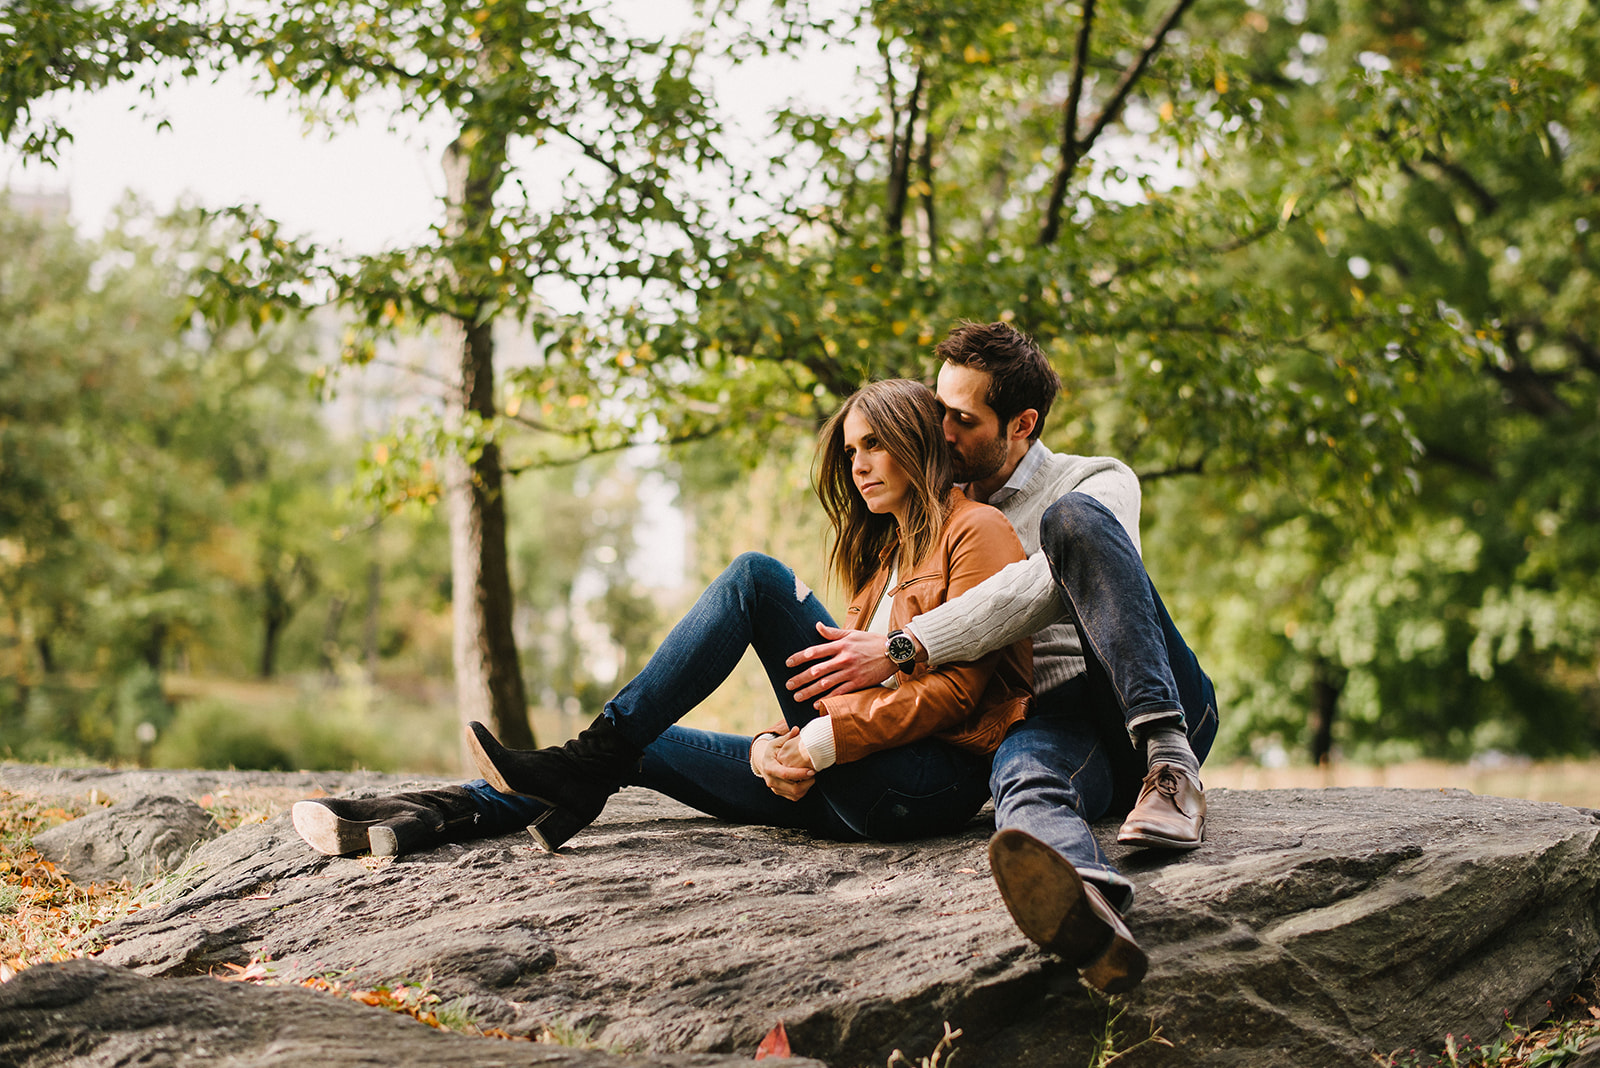 New York City engagement session in Central Park